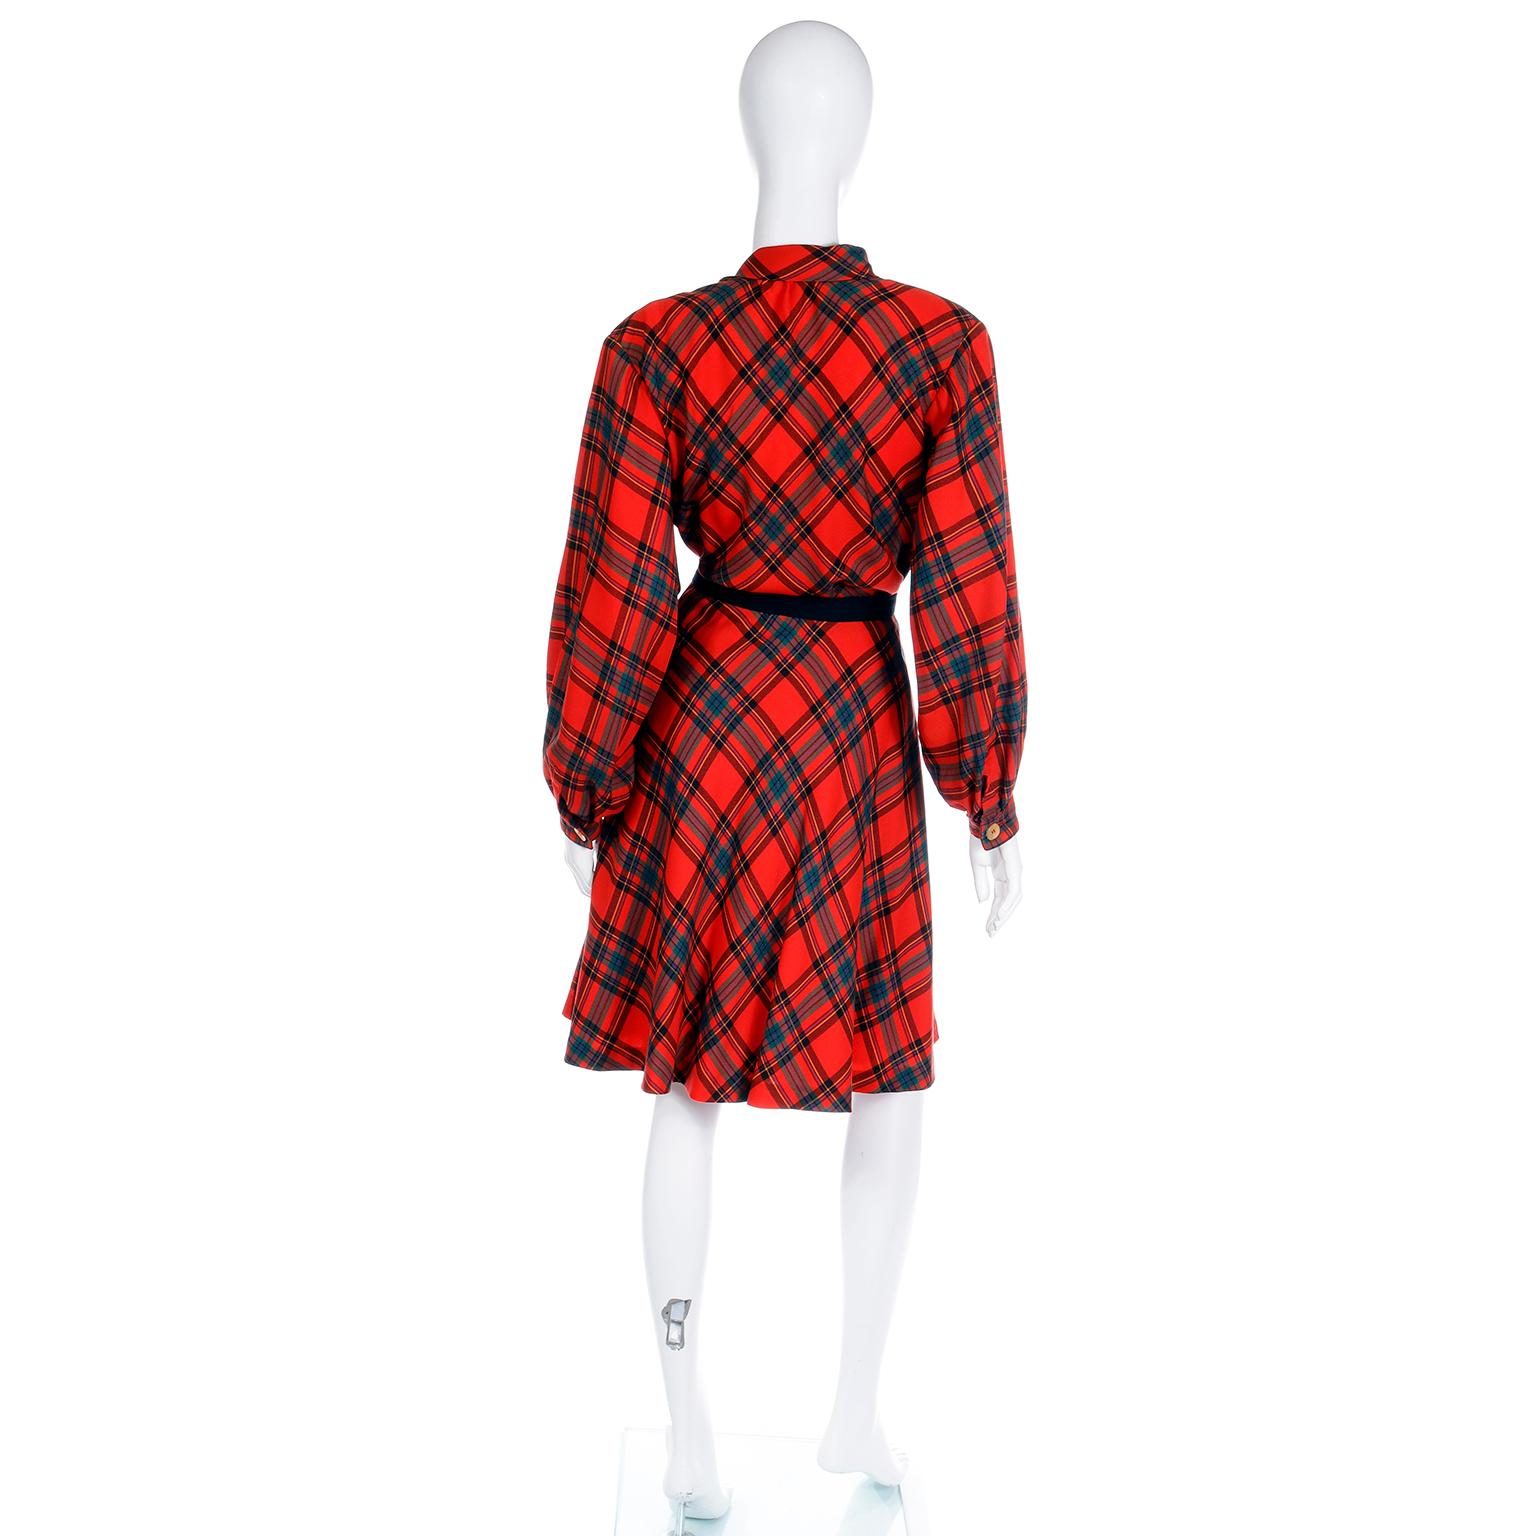 Women's F/W 1987 Yves Saint Laurent Runway 2pc Dress Red Plaid Blouse & Skirt Outfit